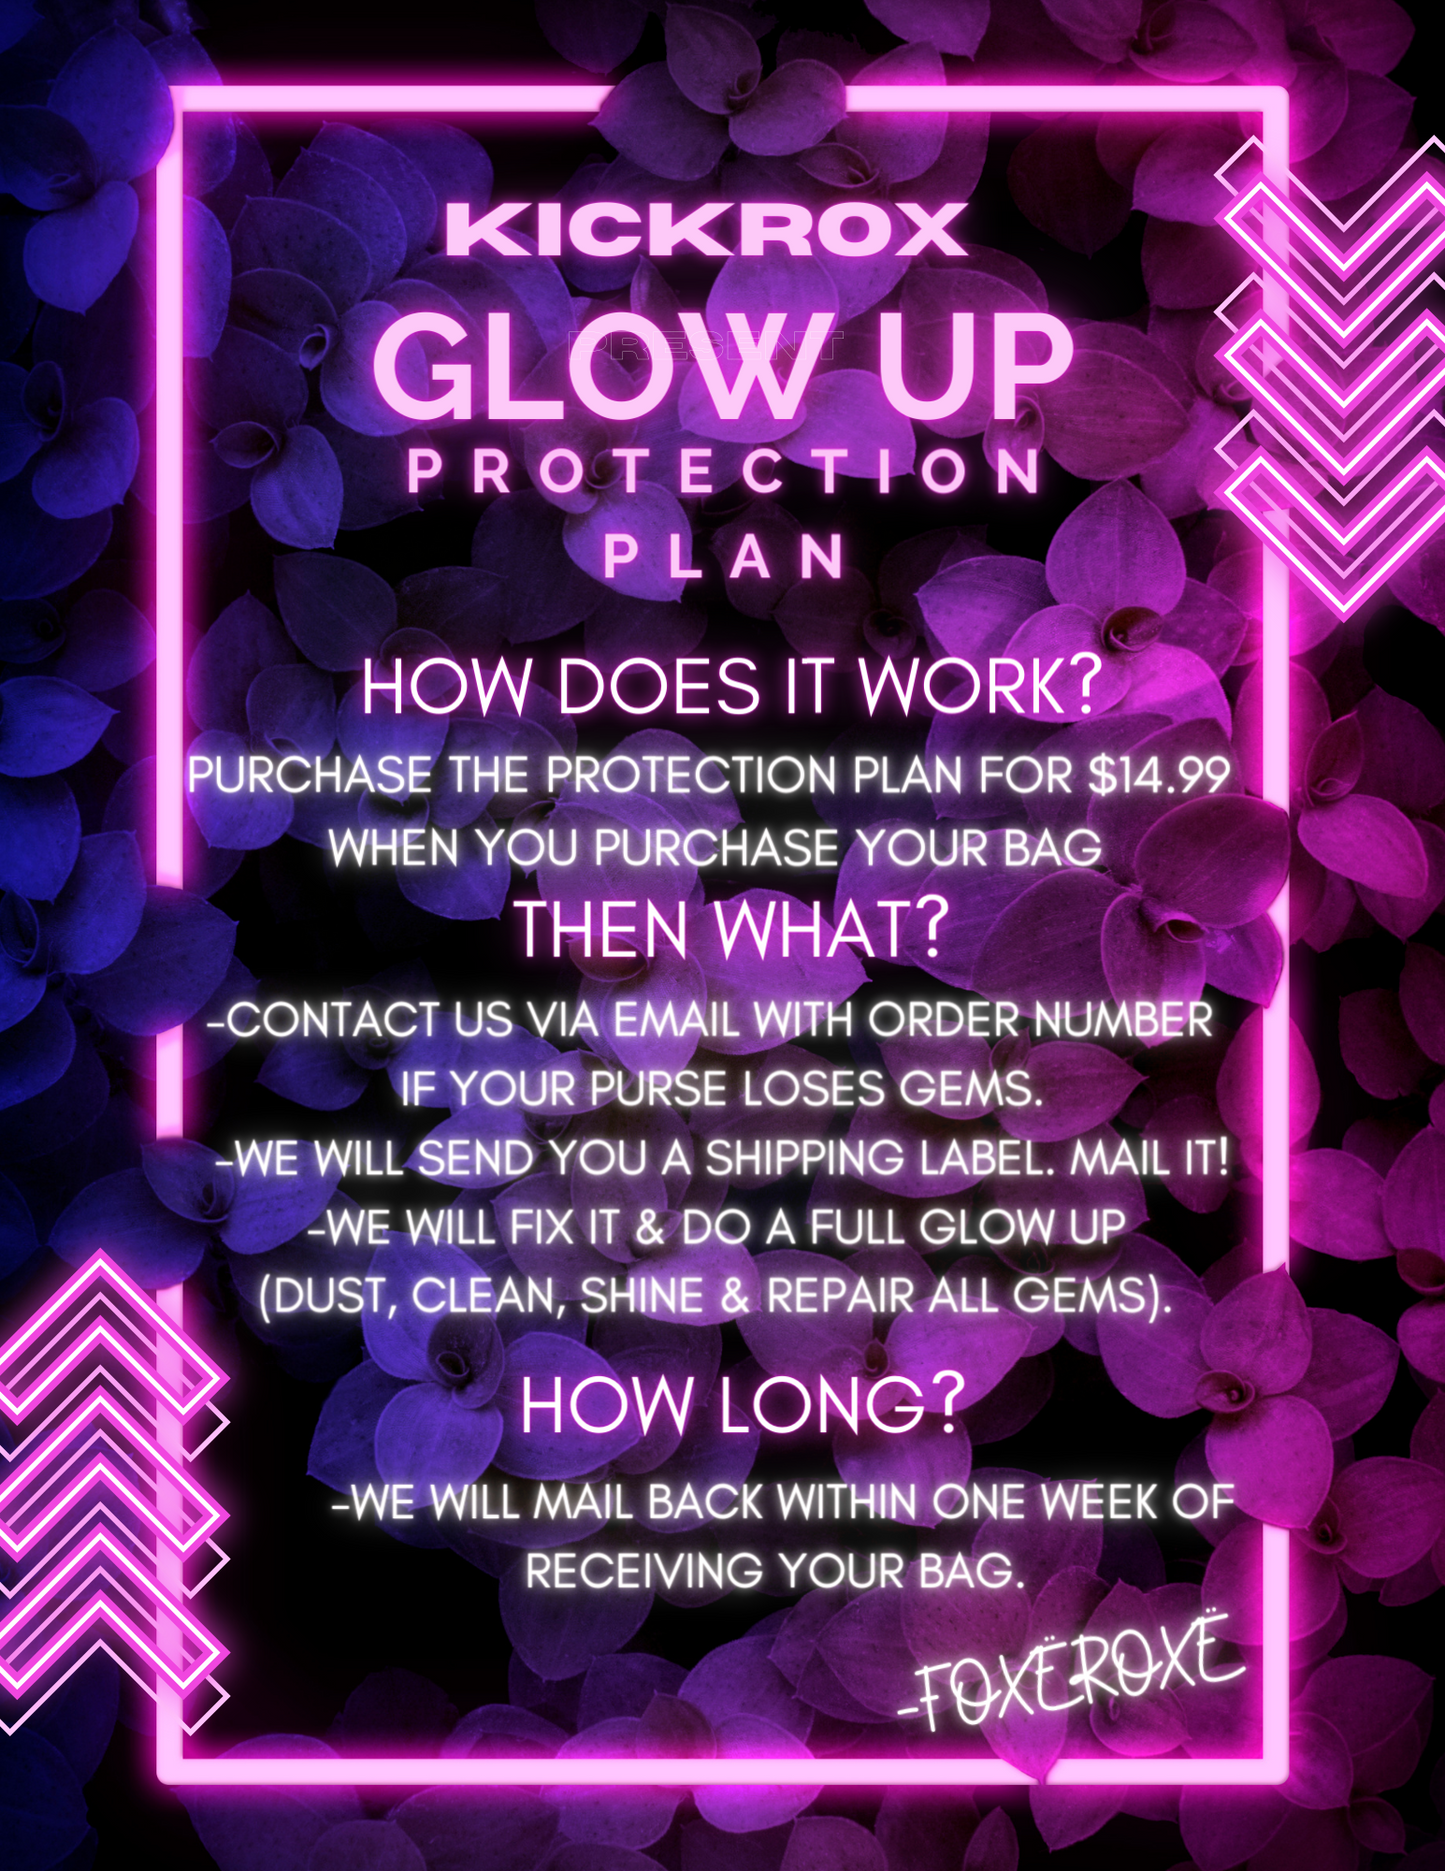 GLOW UP PROTECTION PLAN